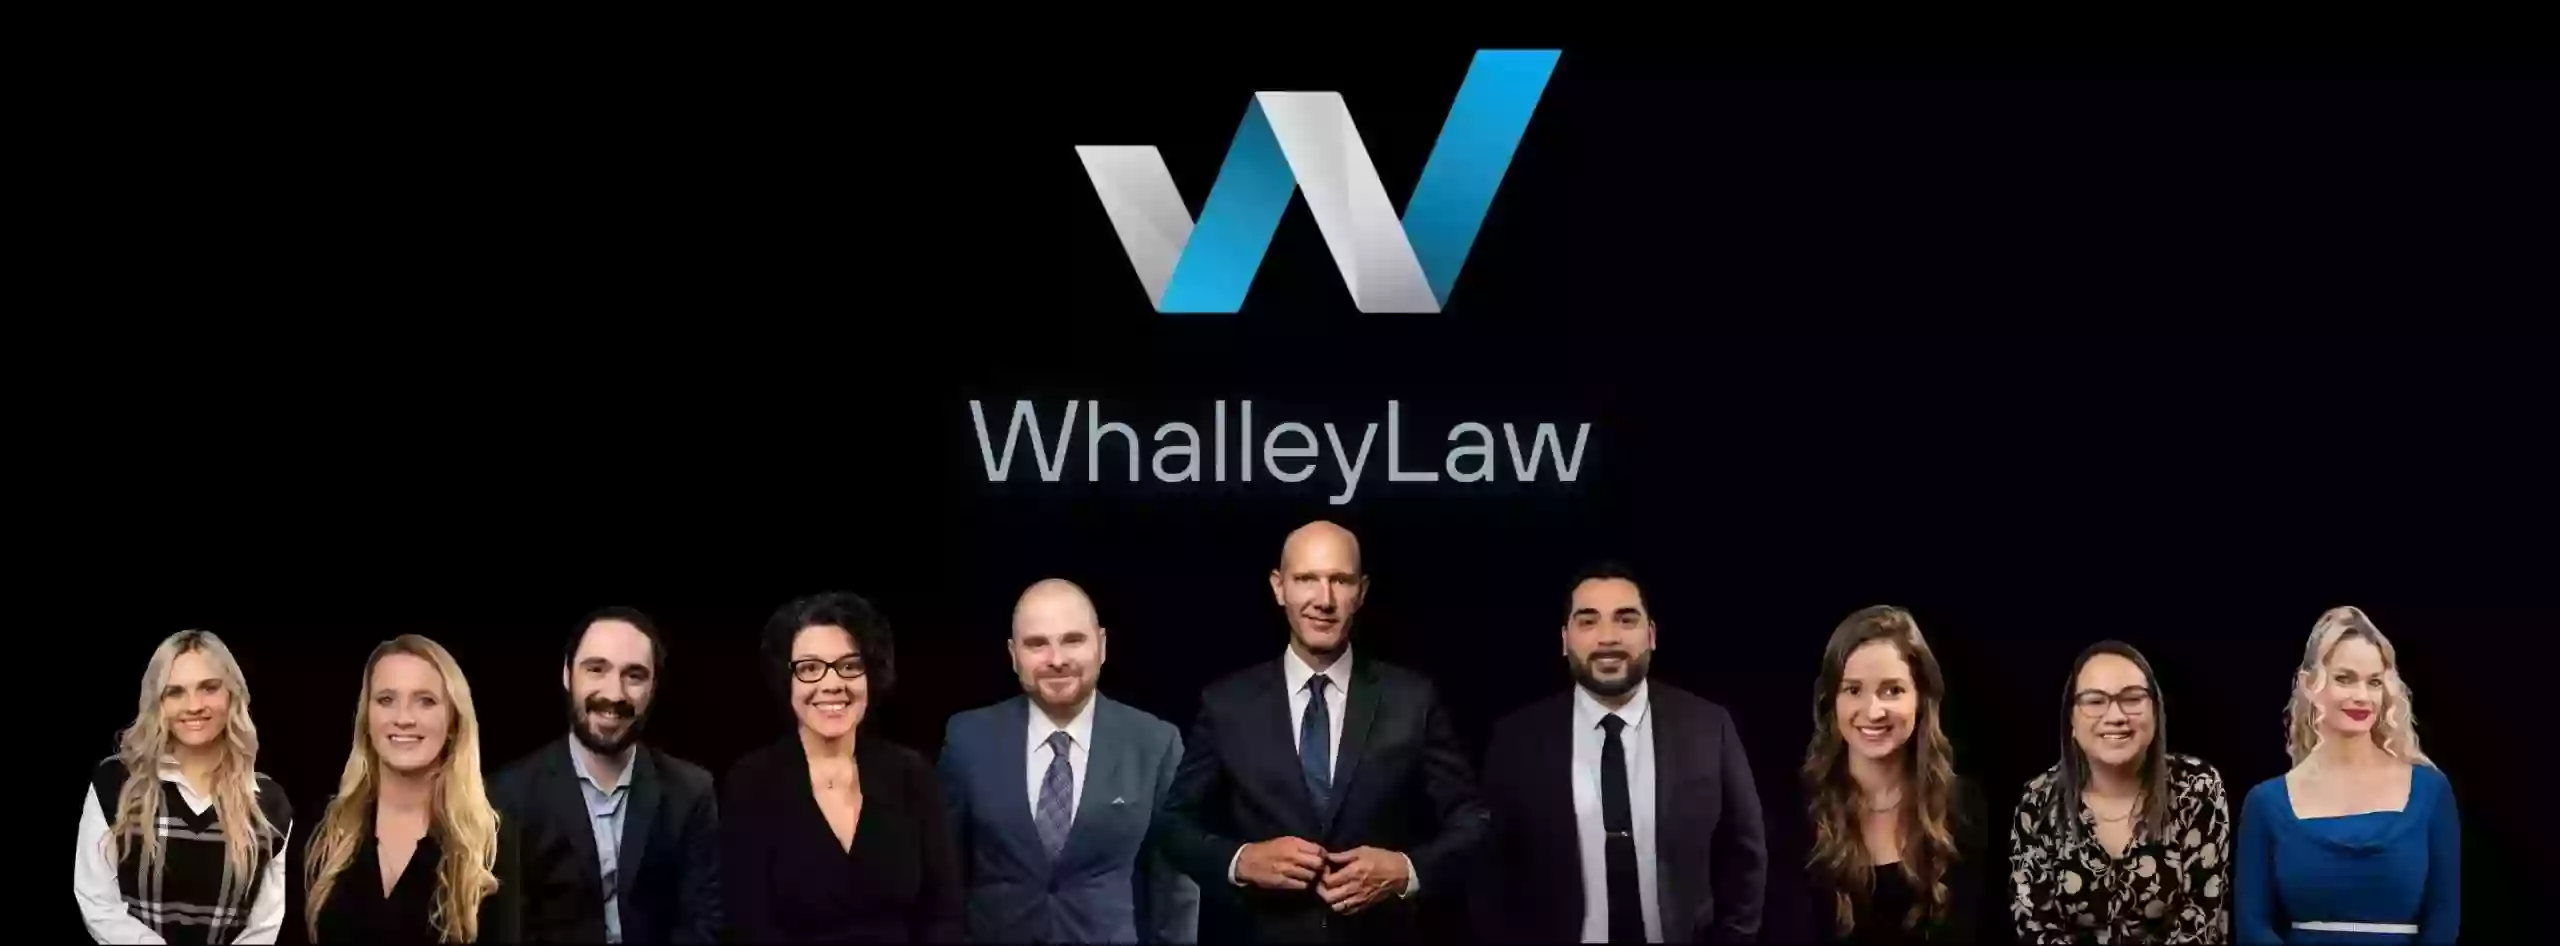 Whalley Law